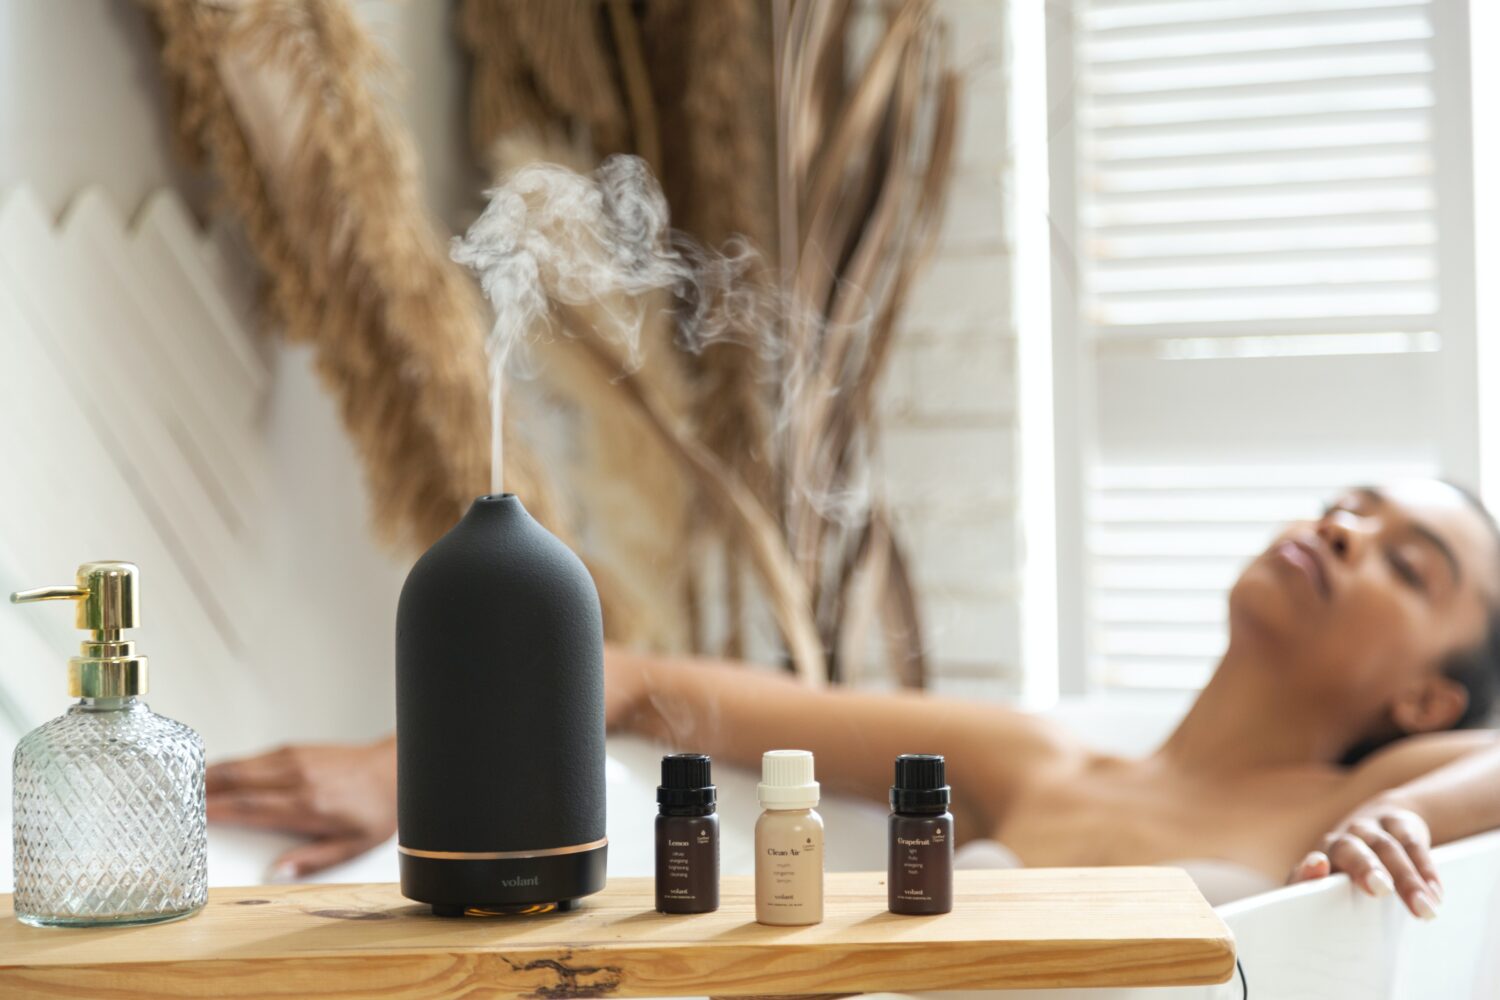 Using aromatherapy for a relaxing bath